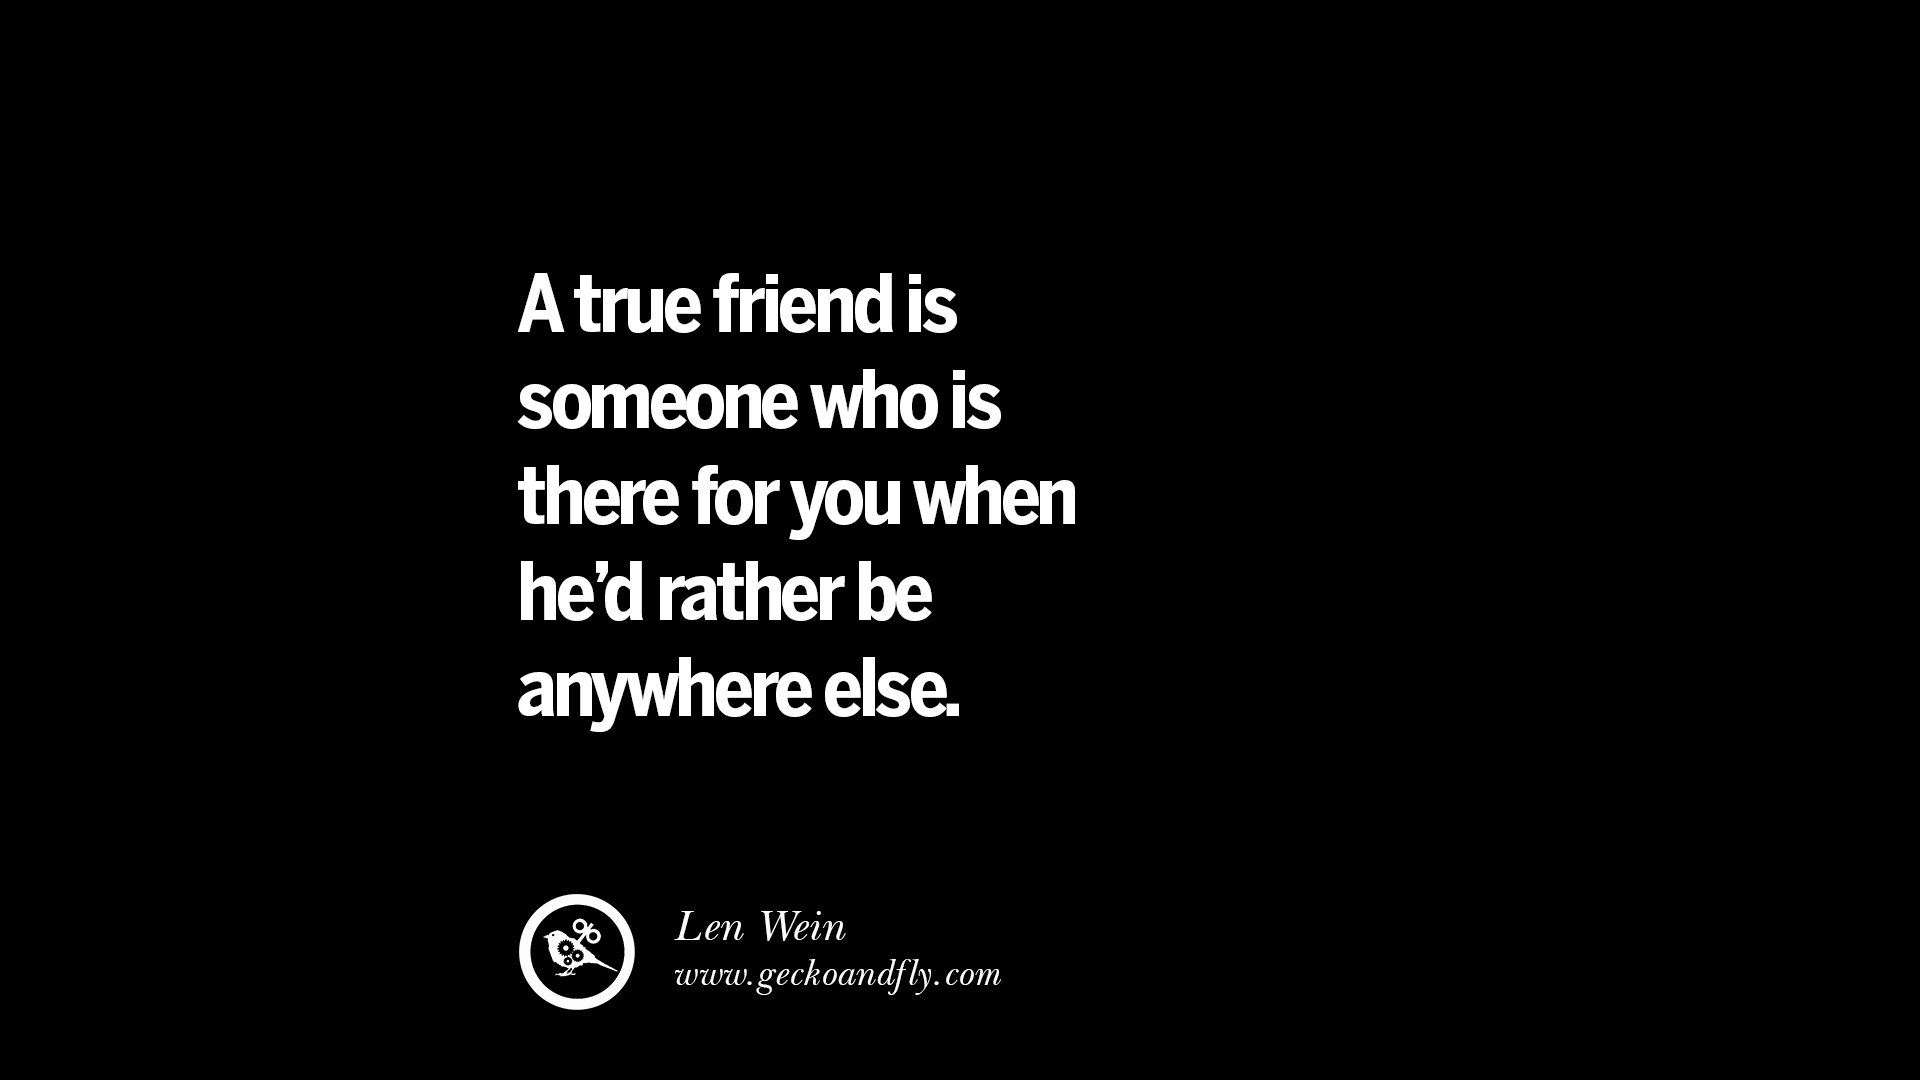 quotes about friendship love friends A true friend is someone who is there for you when